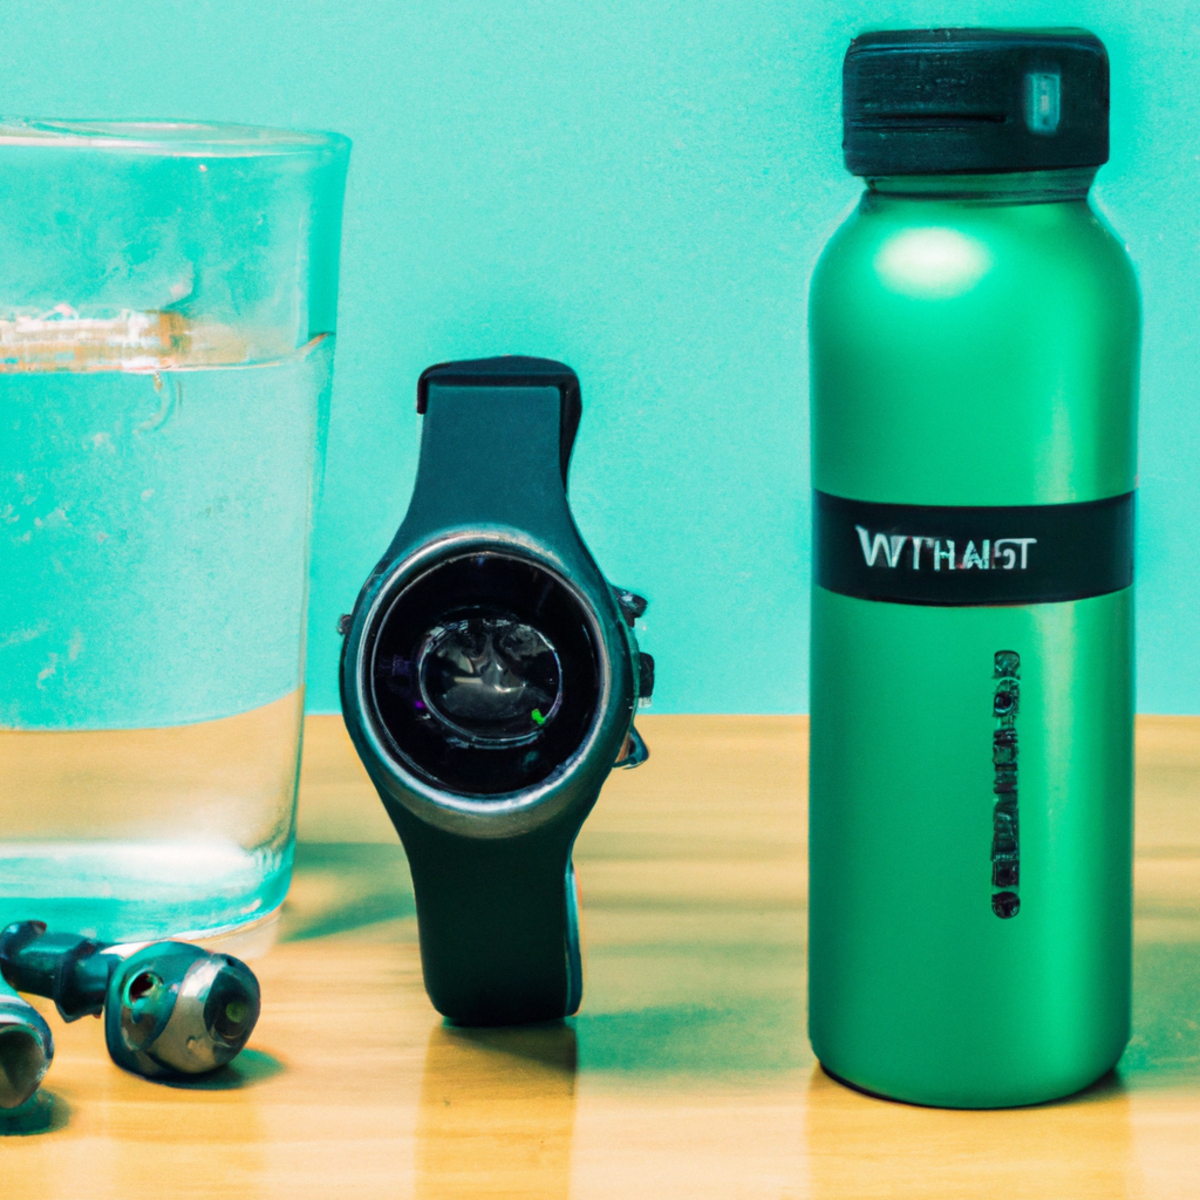 The photo features a sleek fitness tracker watch, a pair of wireless earbuds, and a water bottle with a built-in infuser, showcasing the latest in Fitness Apps and Wearables. The watch, a key component of this tech-savvy ensemble, is prominently displayed in the center of the photo. Its vibrant screen displays various fitness metrics, providing real-time data and insights to the user. Nestled next to the watch, the wireless earbuds highlight their convenience for workouts, allowing users to enjoy their favorite fitness apps or listen to music wirelessly. In the background, the water bottle with a built-in infuser adds a refreshing touch. Its clear body not only showcases the colorful fruits and herbs inside but also signifies the importance of hydration in fitness journeys. The overall aesthetic of the photo is modern and minimalist, emphasizing the high-tech nature of these fitness accessories and their seamless integration with Fitness Apps and Wearables.